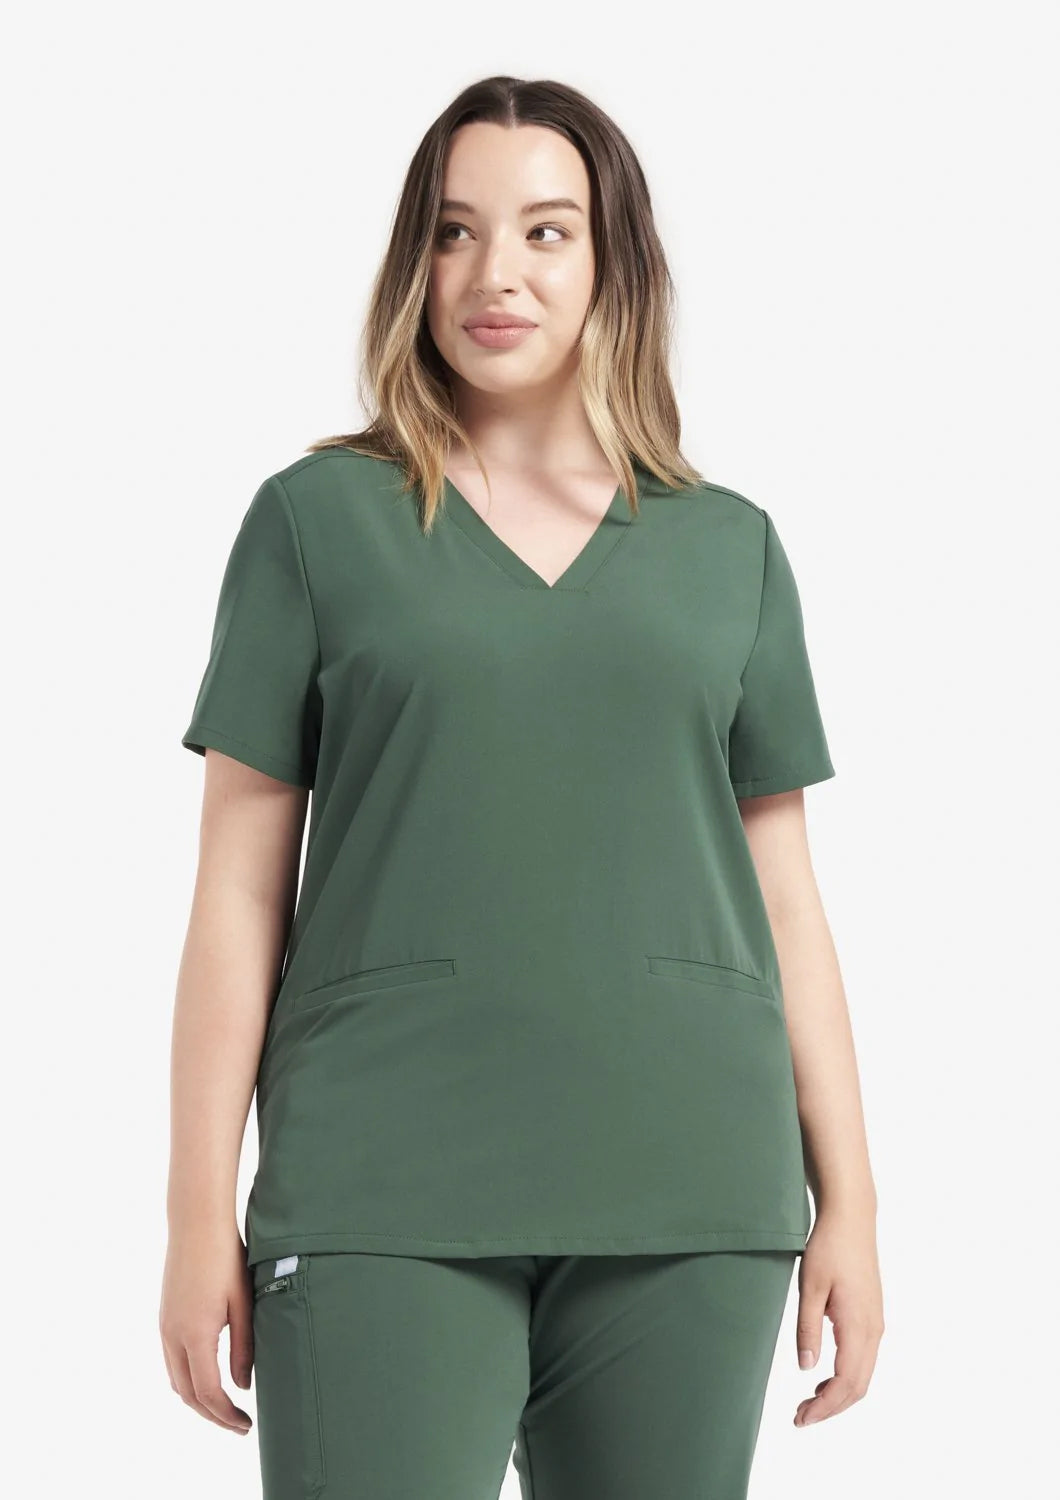 Scrub Tops For Women & Medical Uniforms | 1 To 3 Pockets